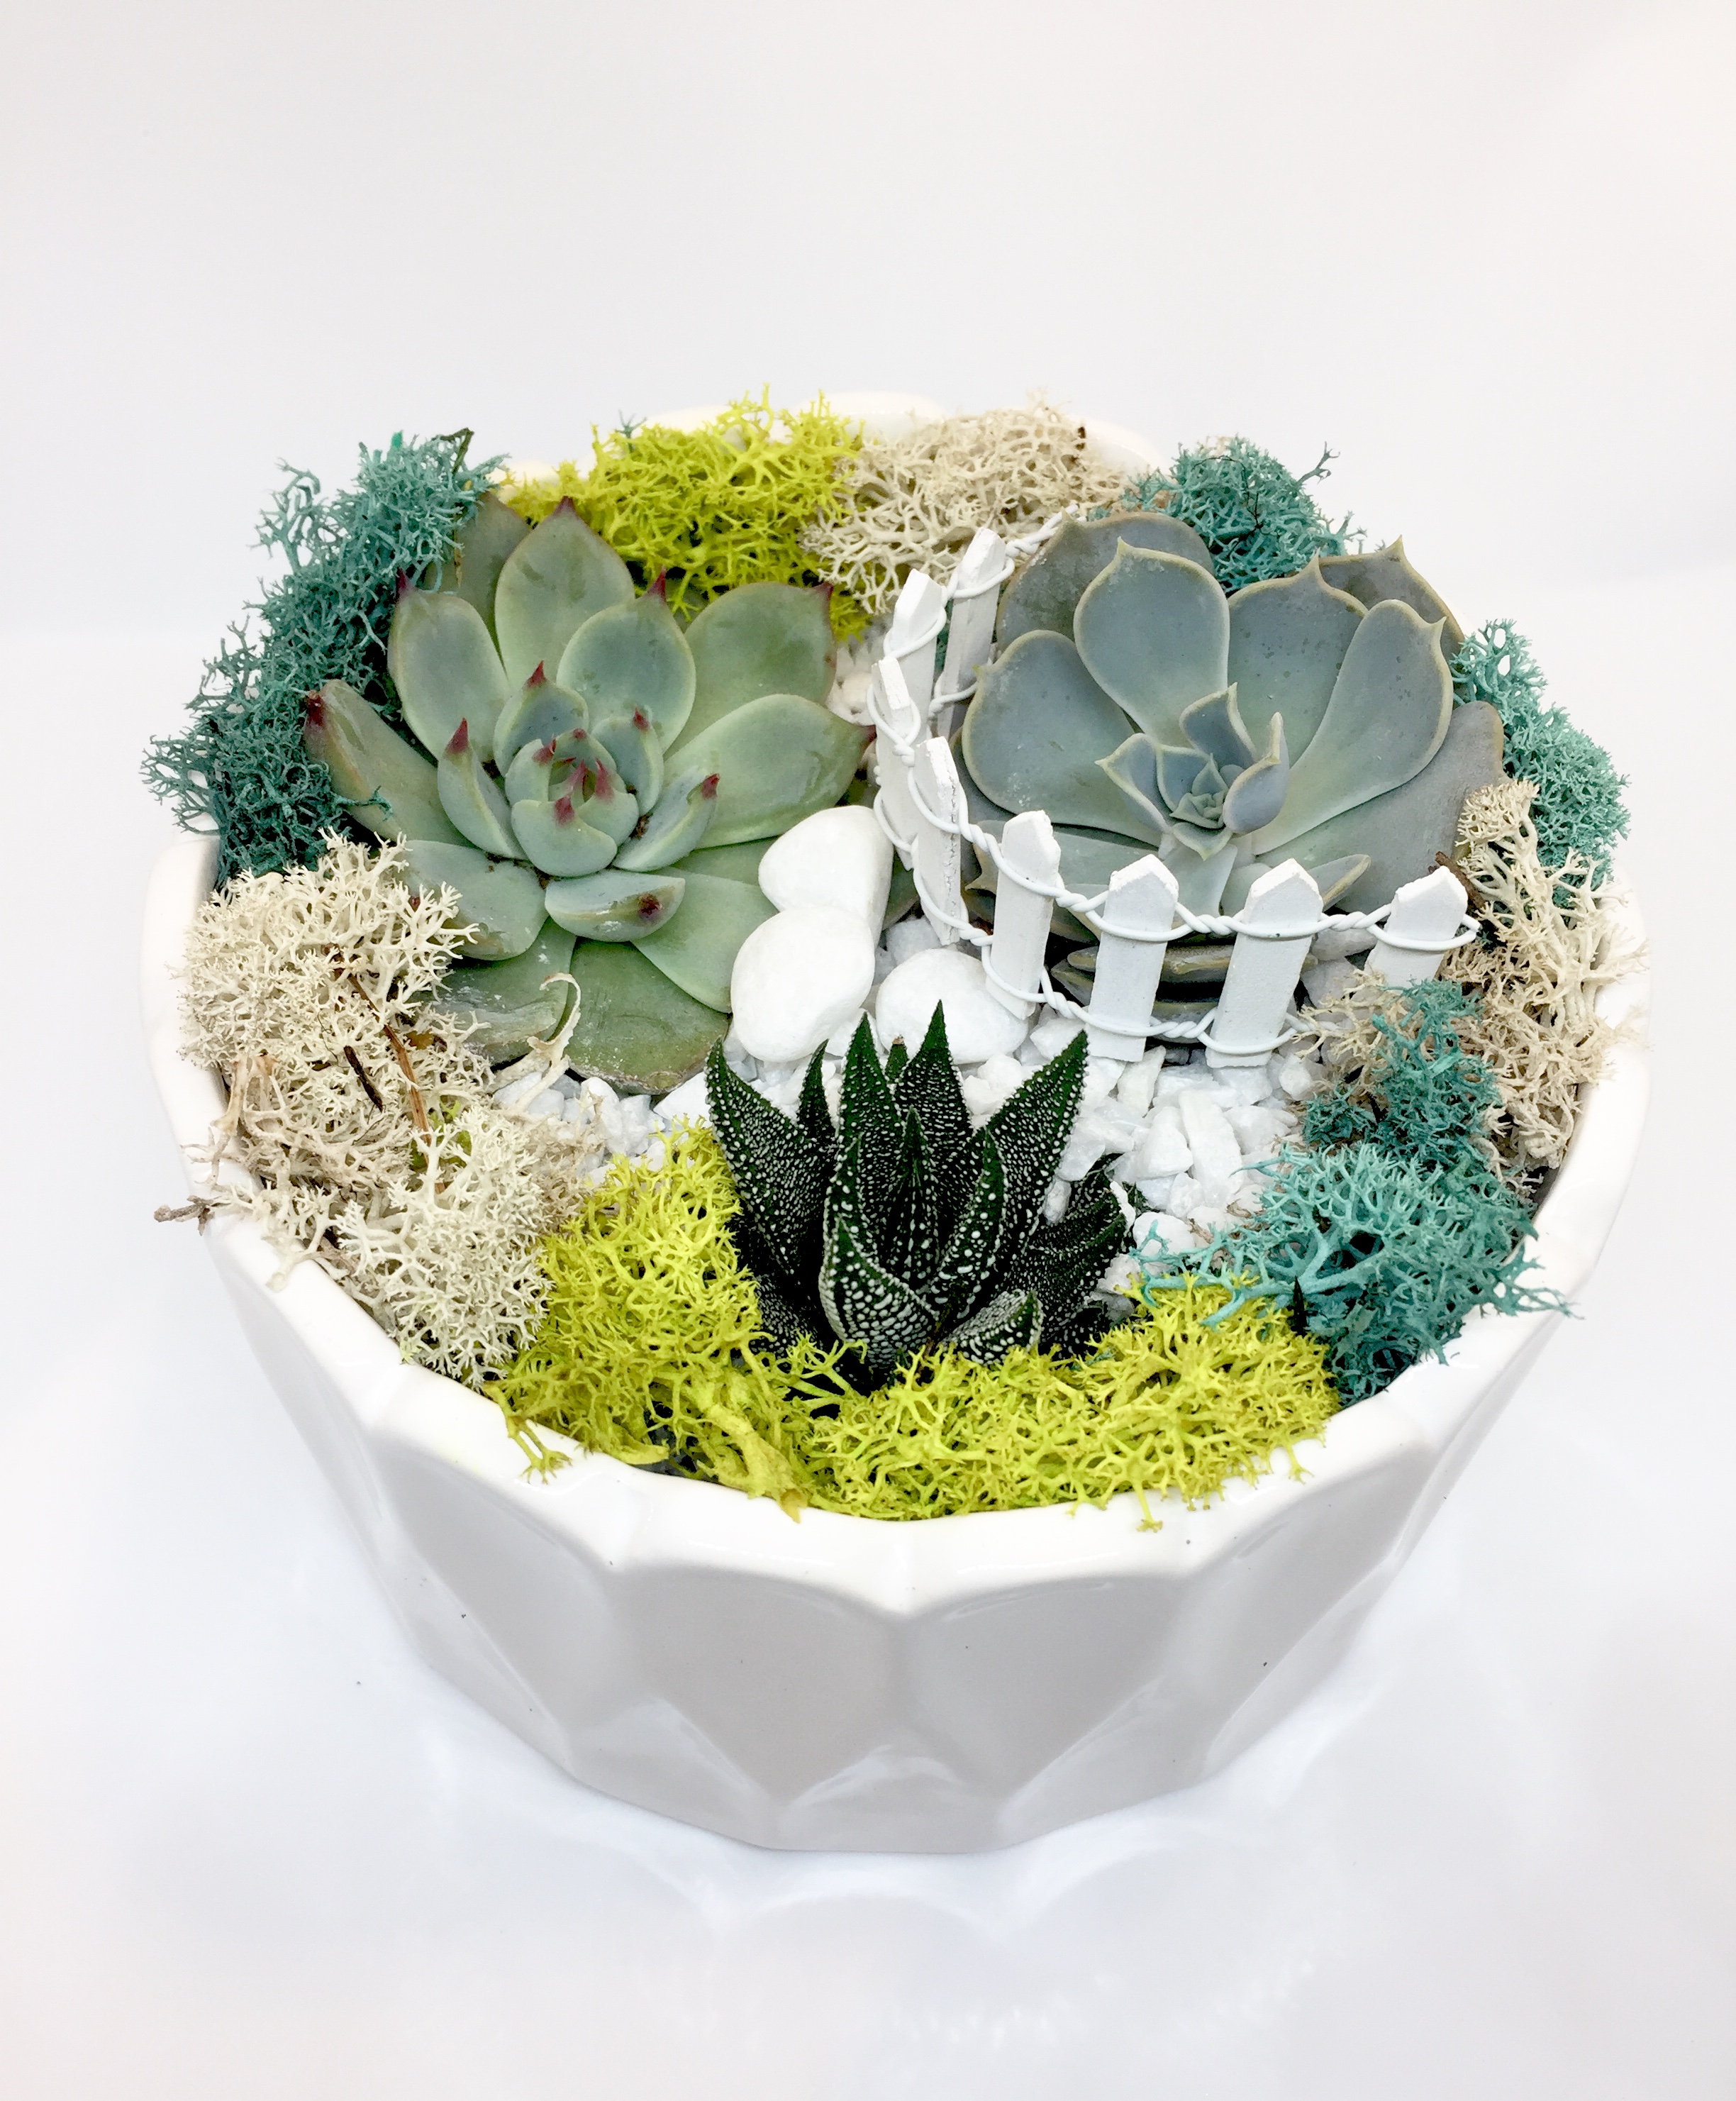 A Natural Garden  White Round Ceramic plant nite project by Yaymaker